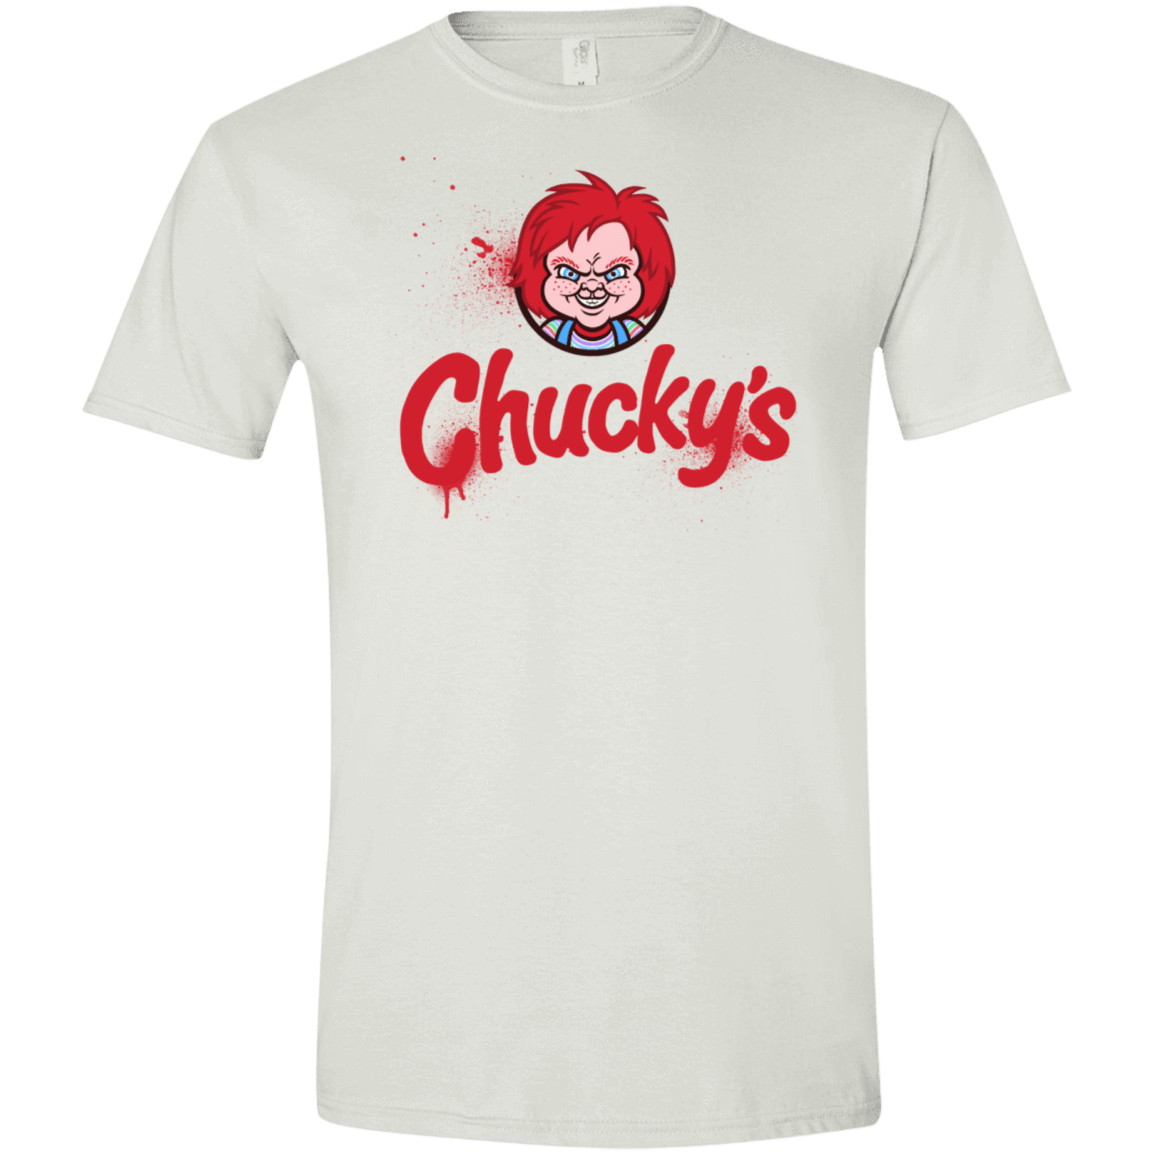 T-Shirts White / X-Small Chuckys Logo Men's Semi-Fitted Softstyle